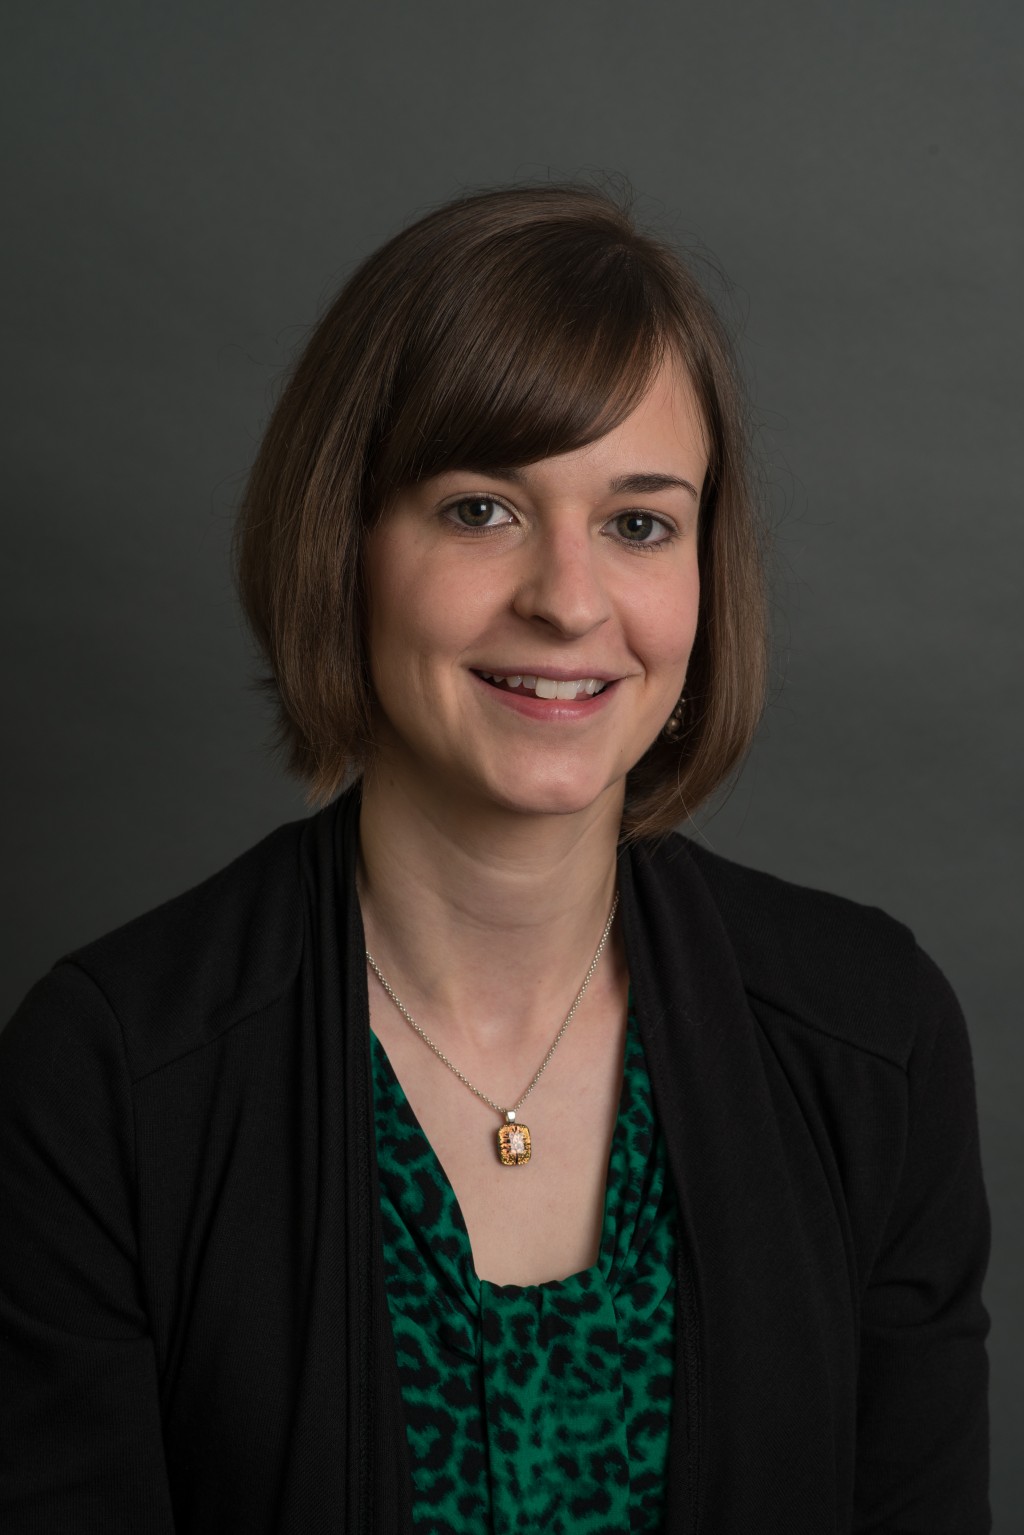 Stacey Dubois, assistant director of Academic Affairs